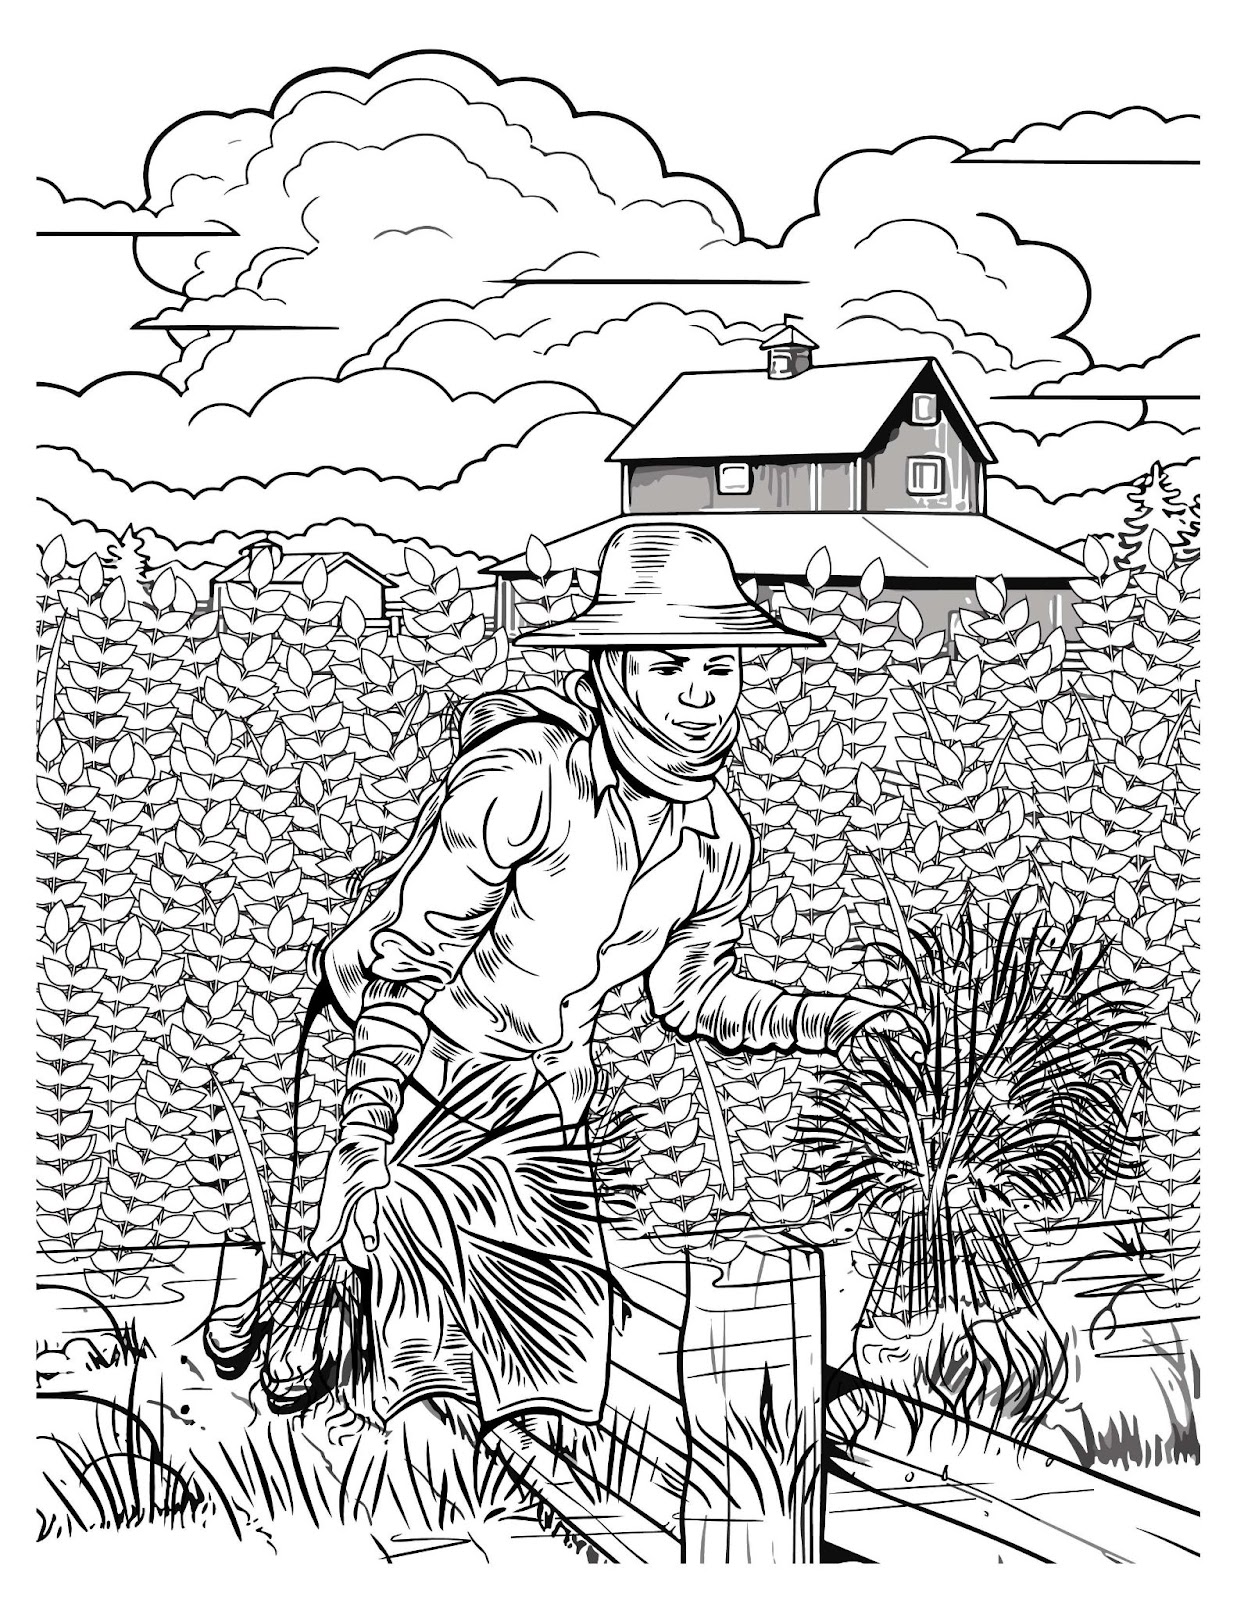 Hardworking Farmer Coloring Pages25